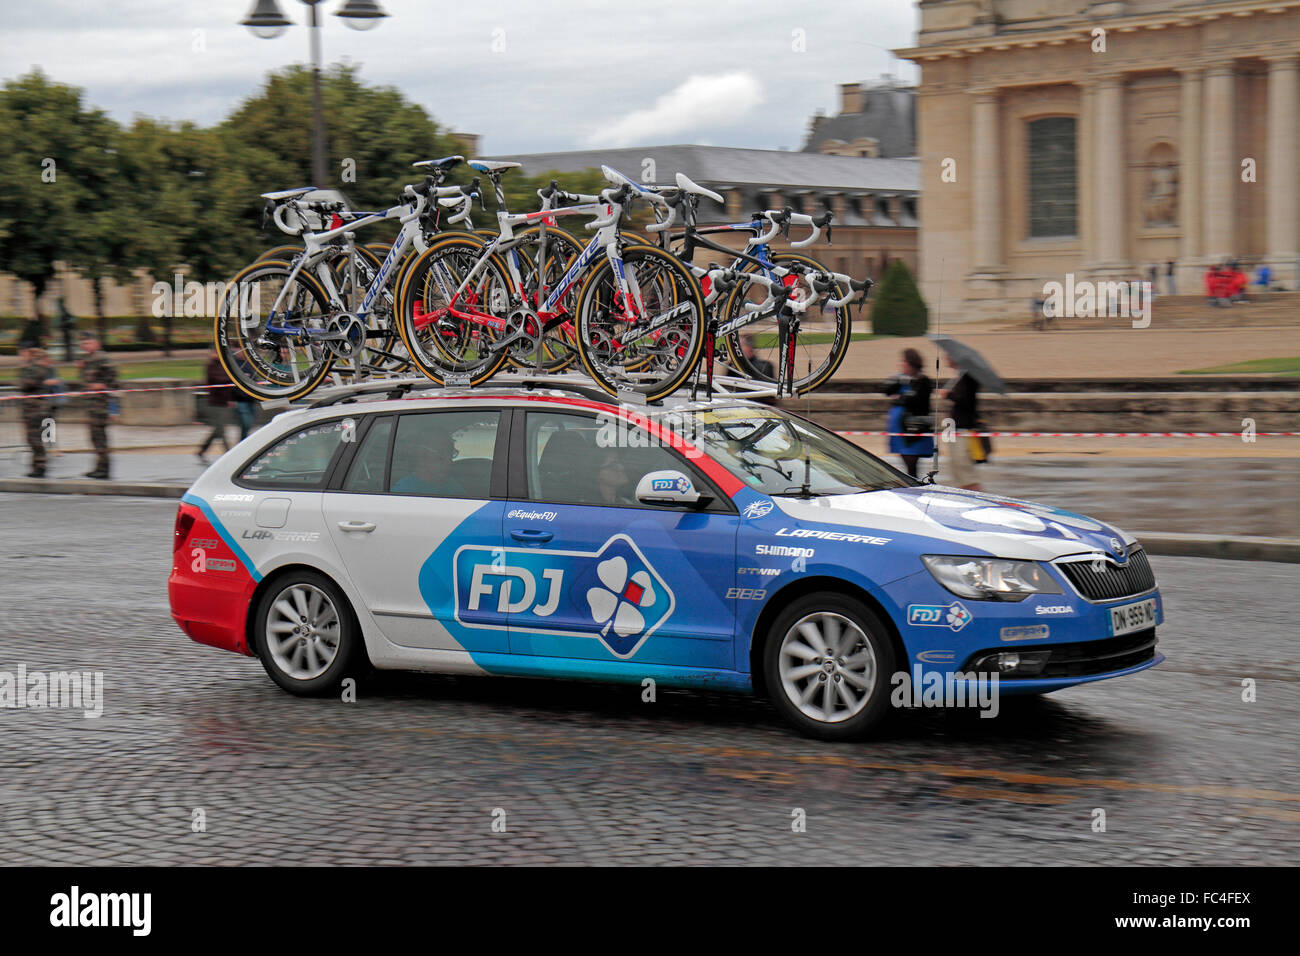 One of the 2015 Tour de France support cars for FDJ as it passes through Paris on the last stage of the race. Stock Photo